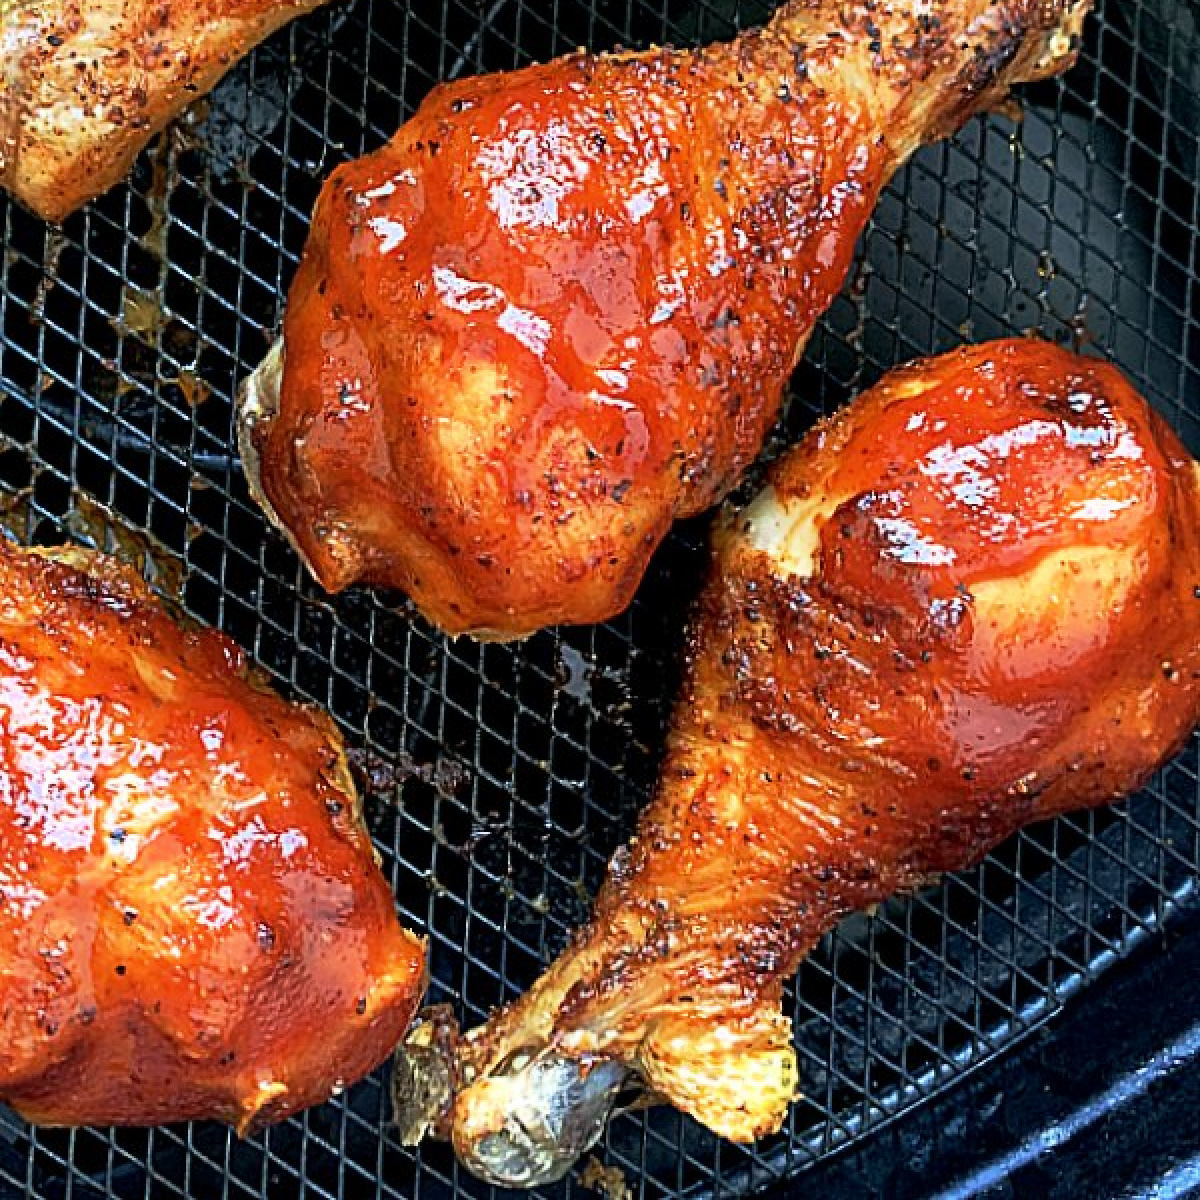 Perfectly Cooked Grilled Chicken Legs (Drumsticks) Every Single